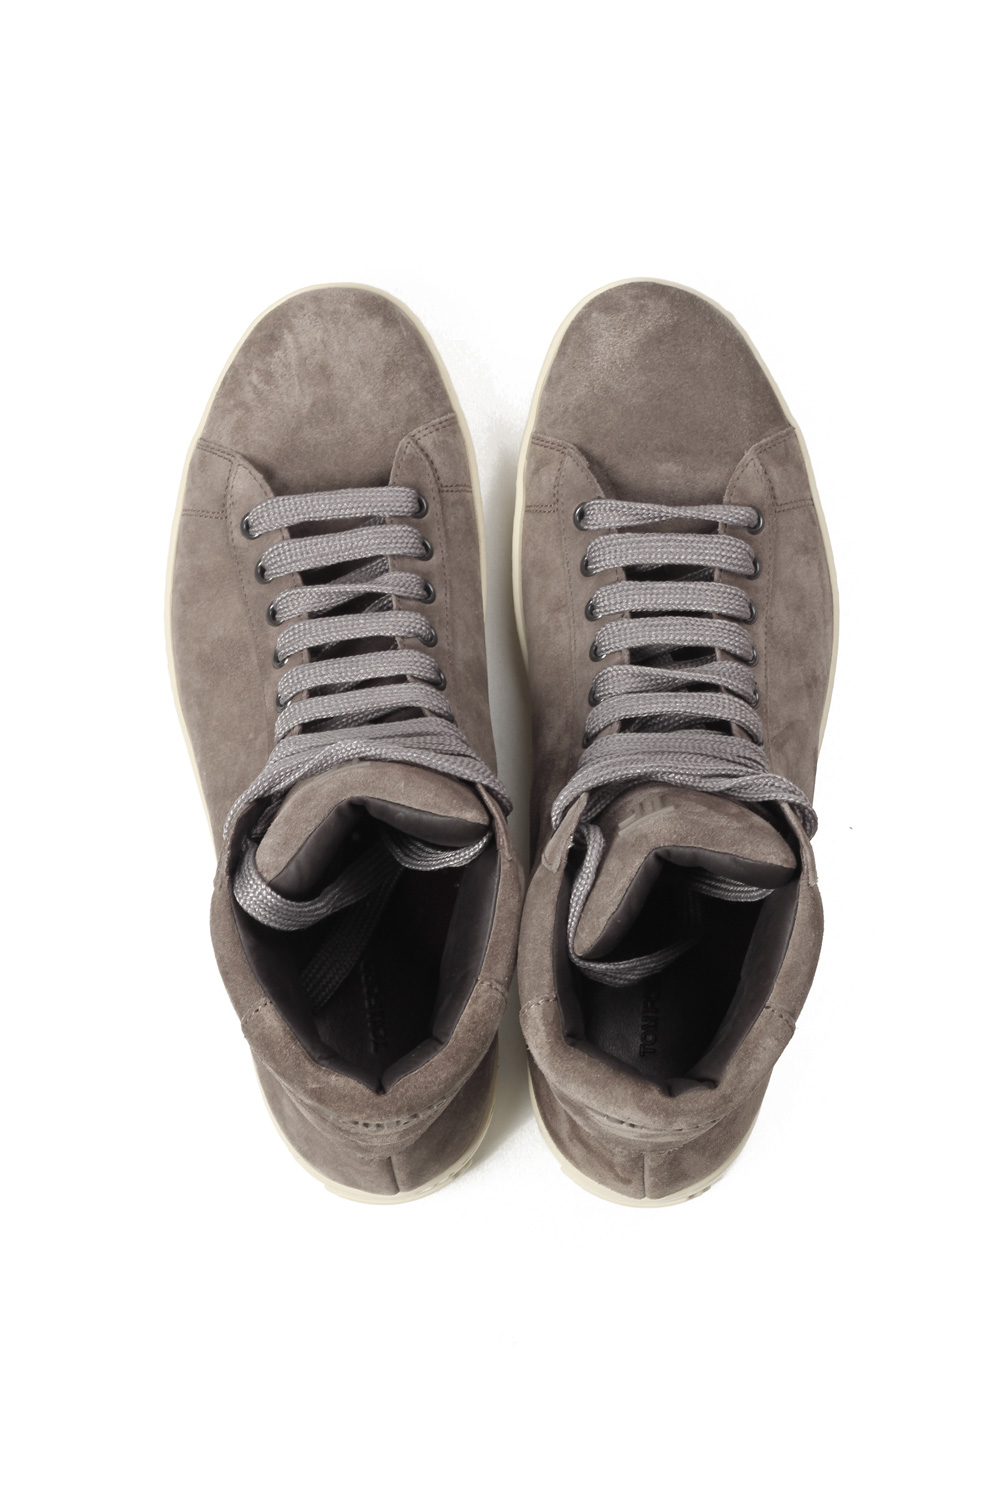 TOM FORD Russel High Top Taupe Suede Sneaker Shoes Size 10 UK / 11 U.S. | Costume Limité